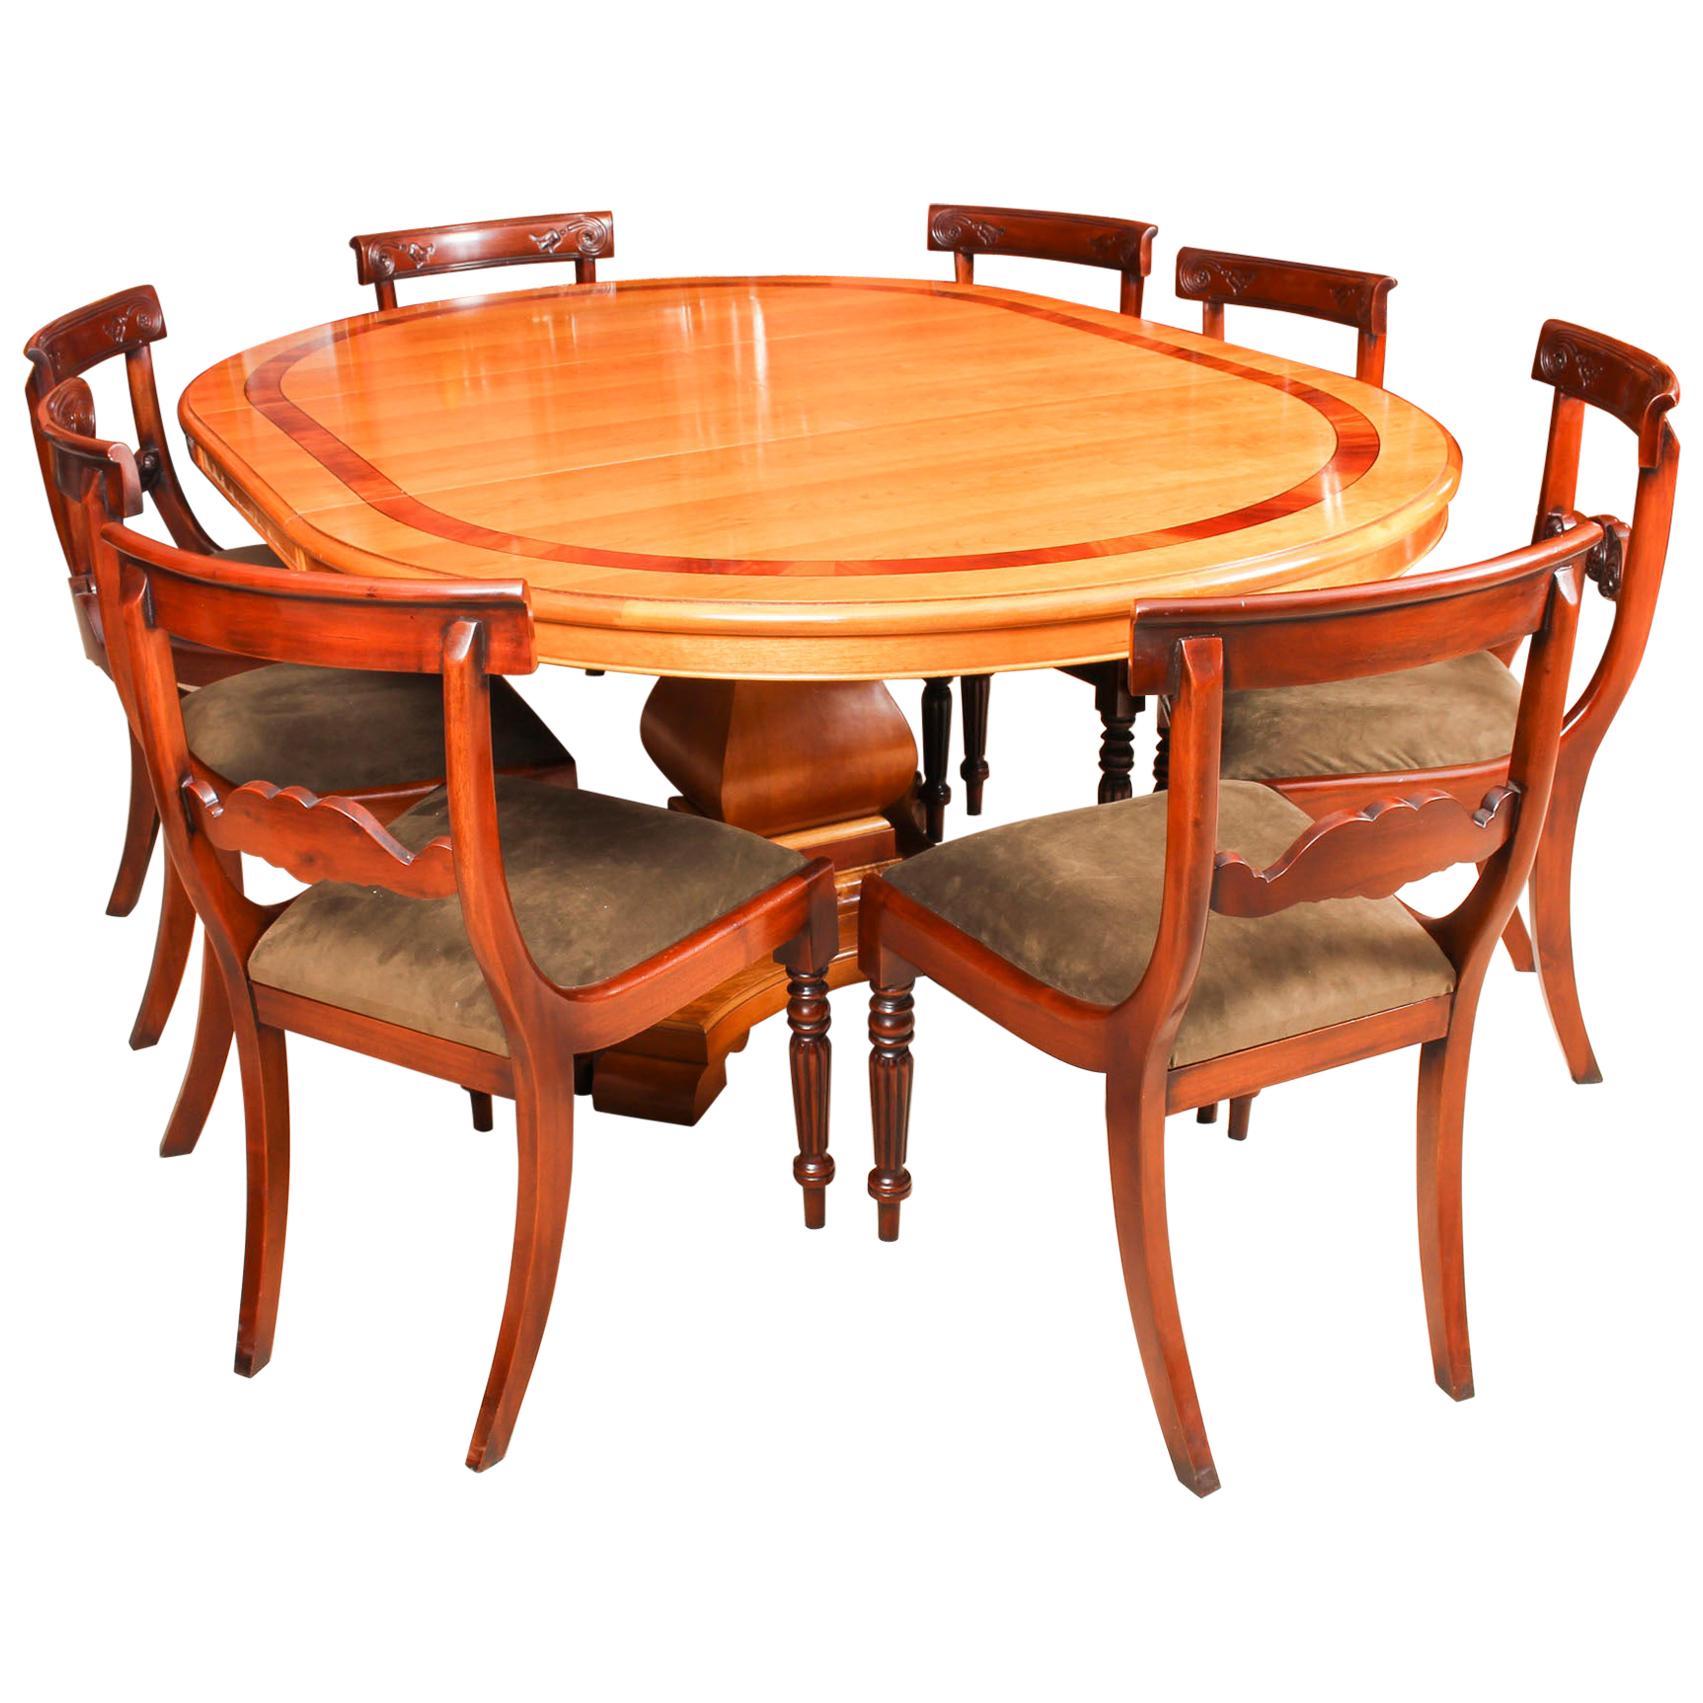 Vintage Circular Extending Dining Table by Charles Barr & 8 Chairs, 20th Century